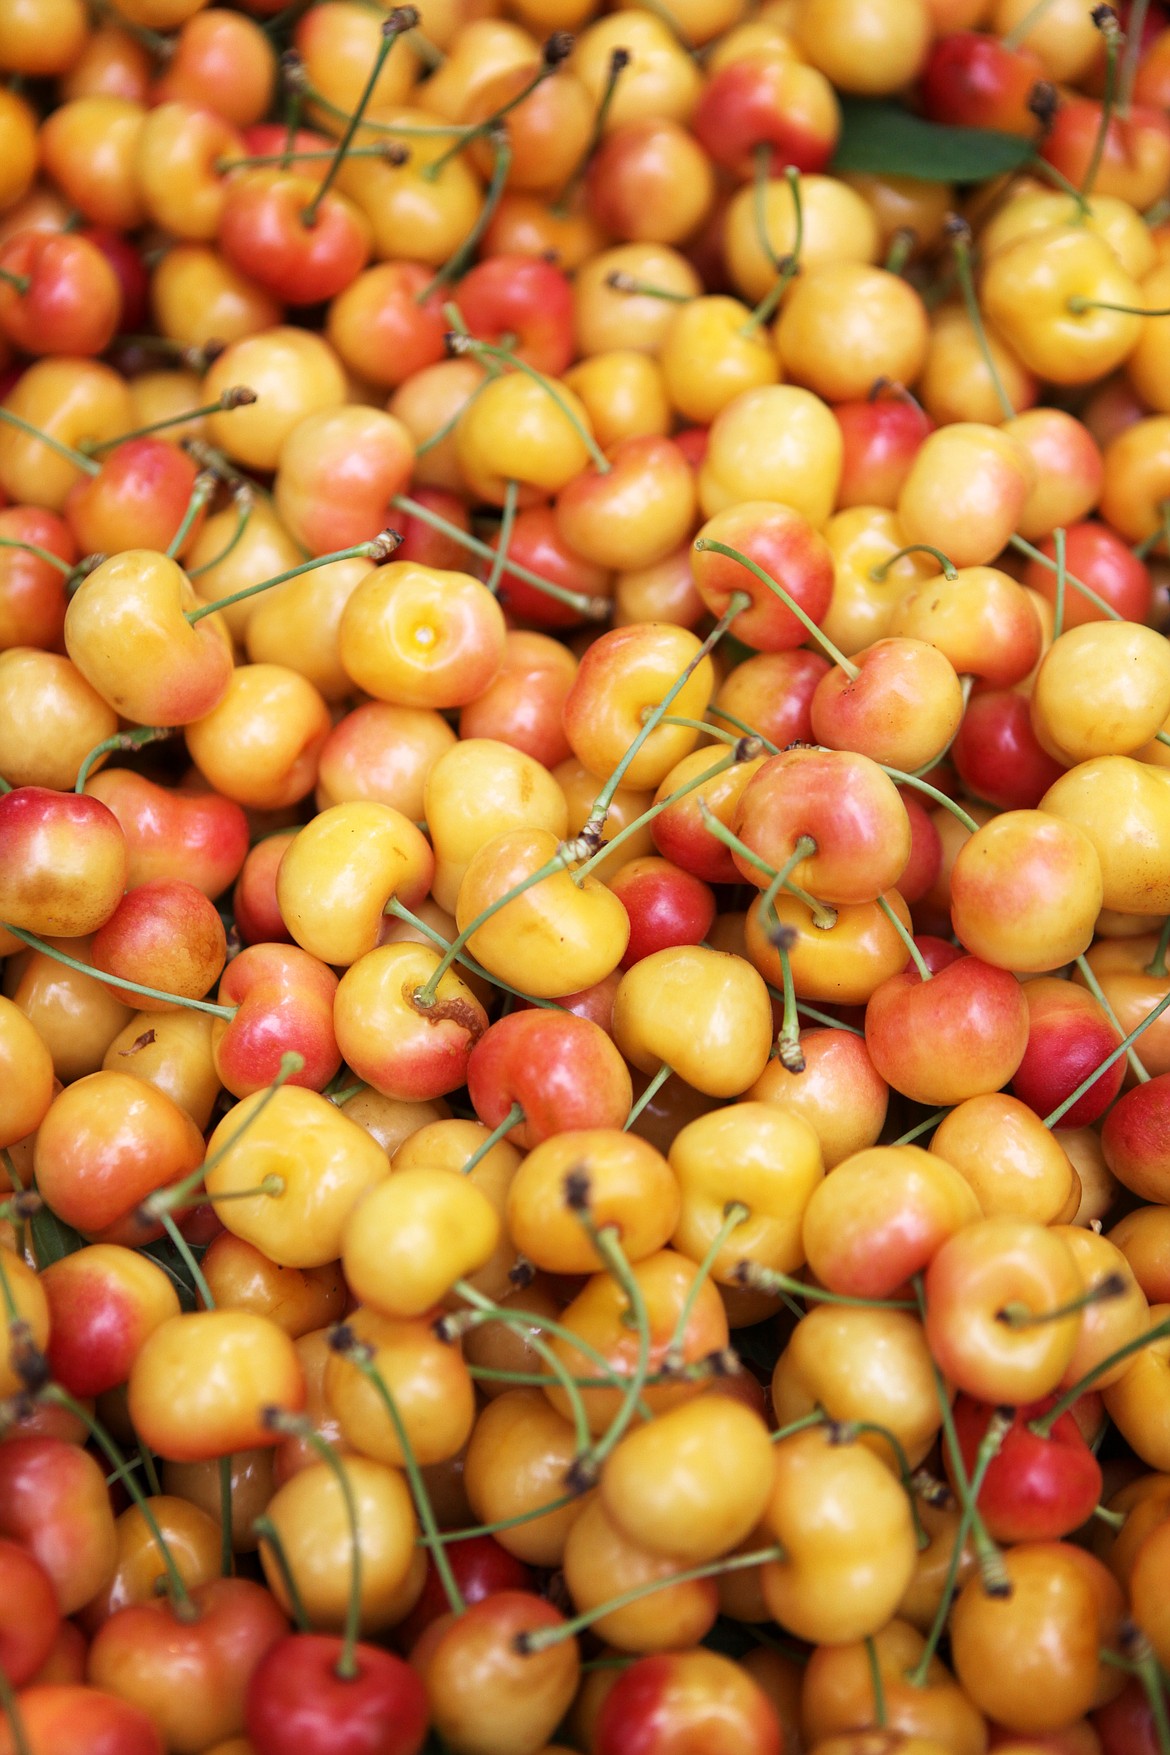 Rainier cherries fill two boxes at Bush&#146;s Jubilee Orchards in Bigfork. Cherry picker Guillermo Diaz harvests cherries the afternoon of Tuesday, Aug. 8 at Bush&#146;s Jubilee Orchards. (Mackenzie Reiss/Daily Inter Lake)